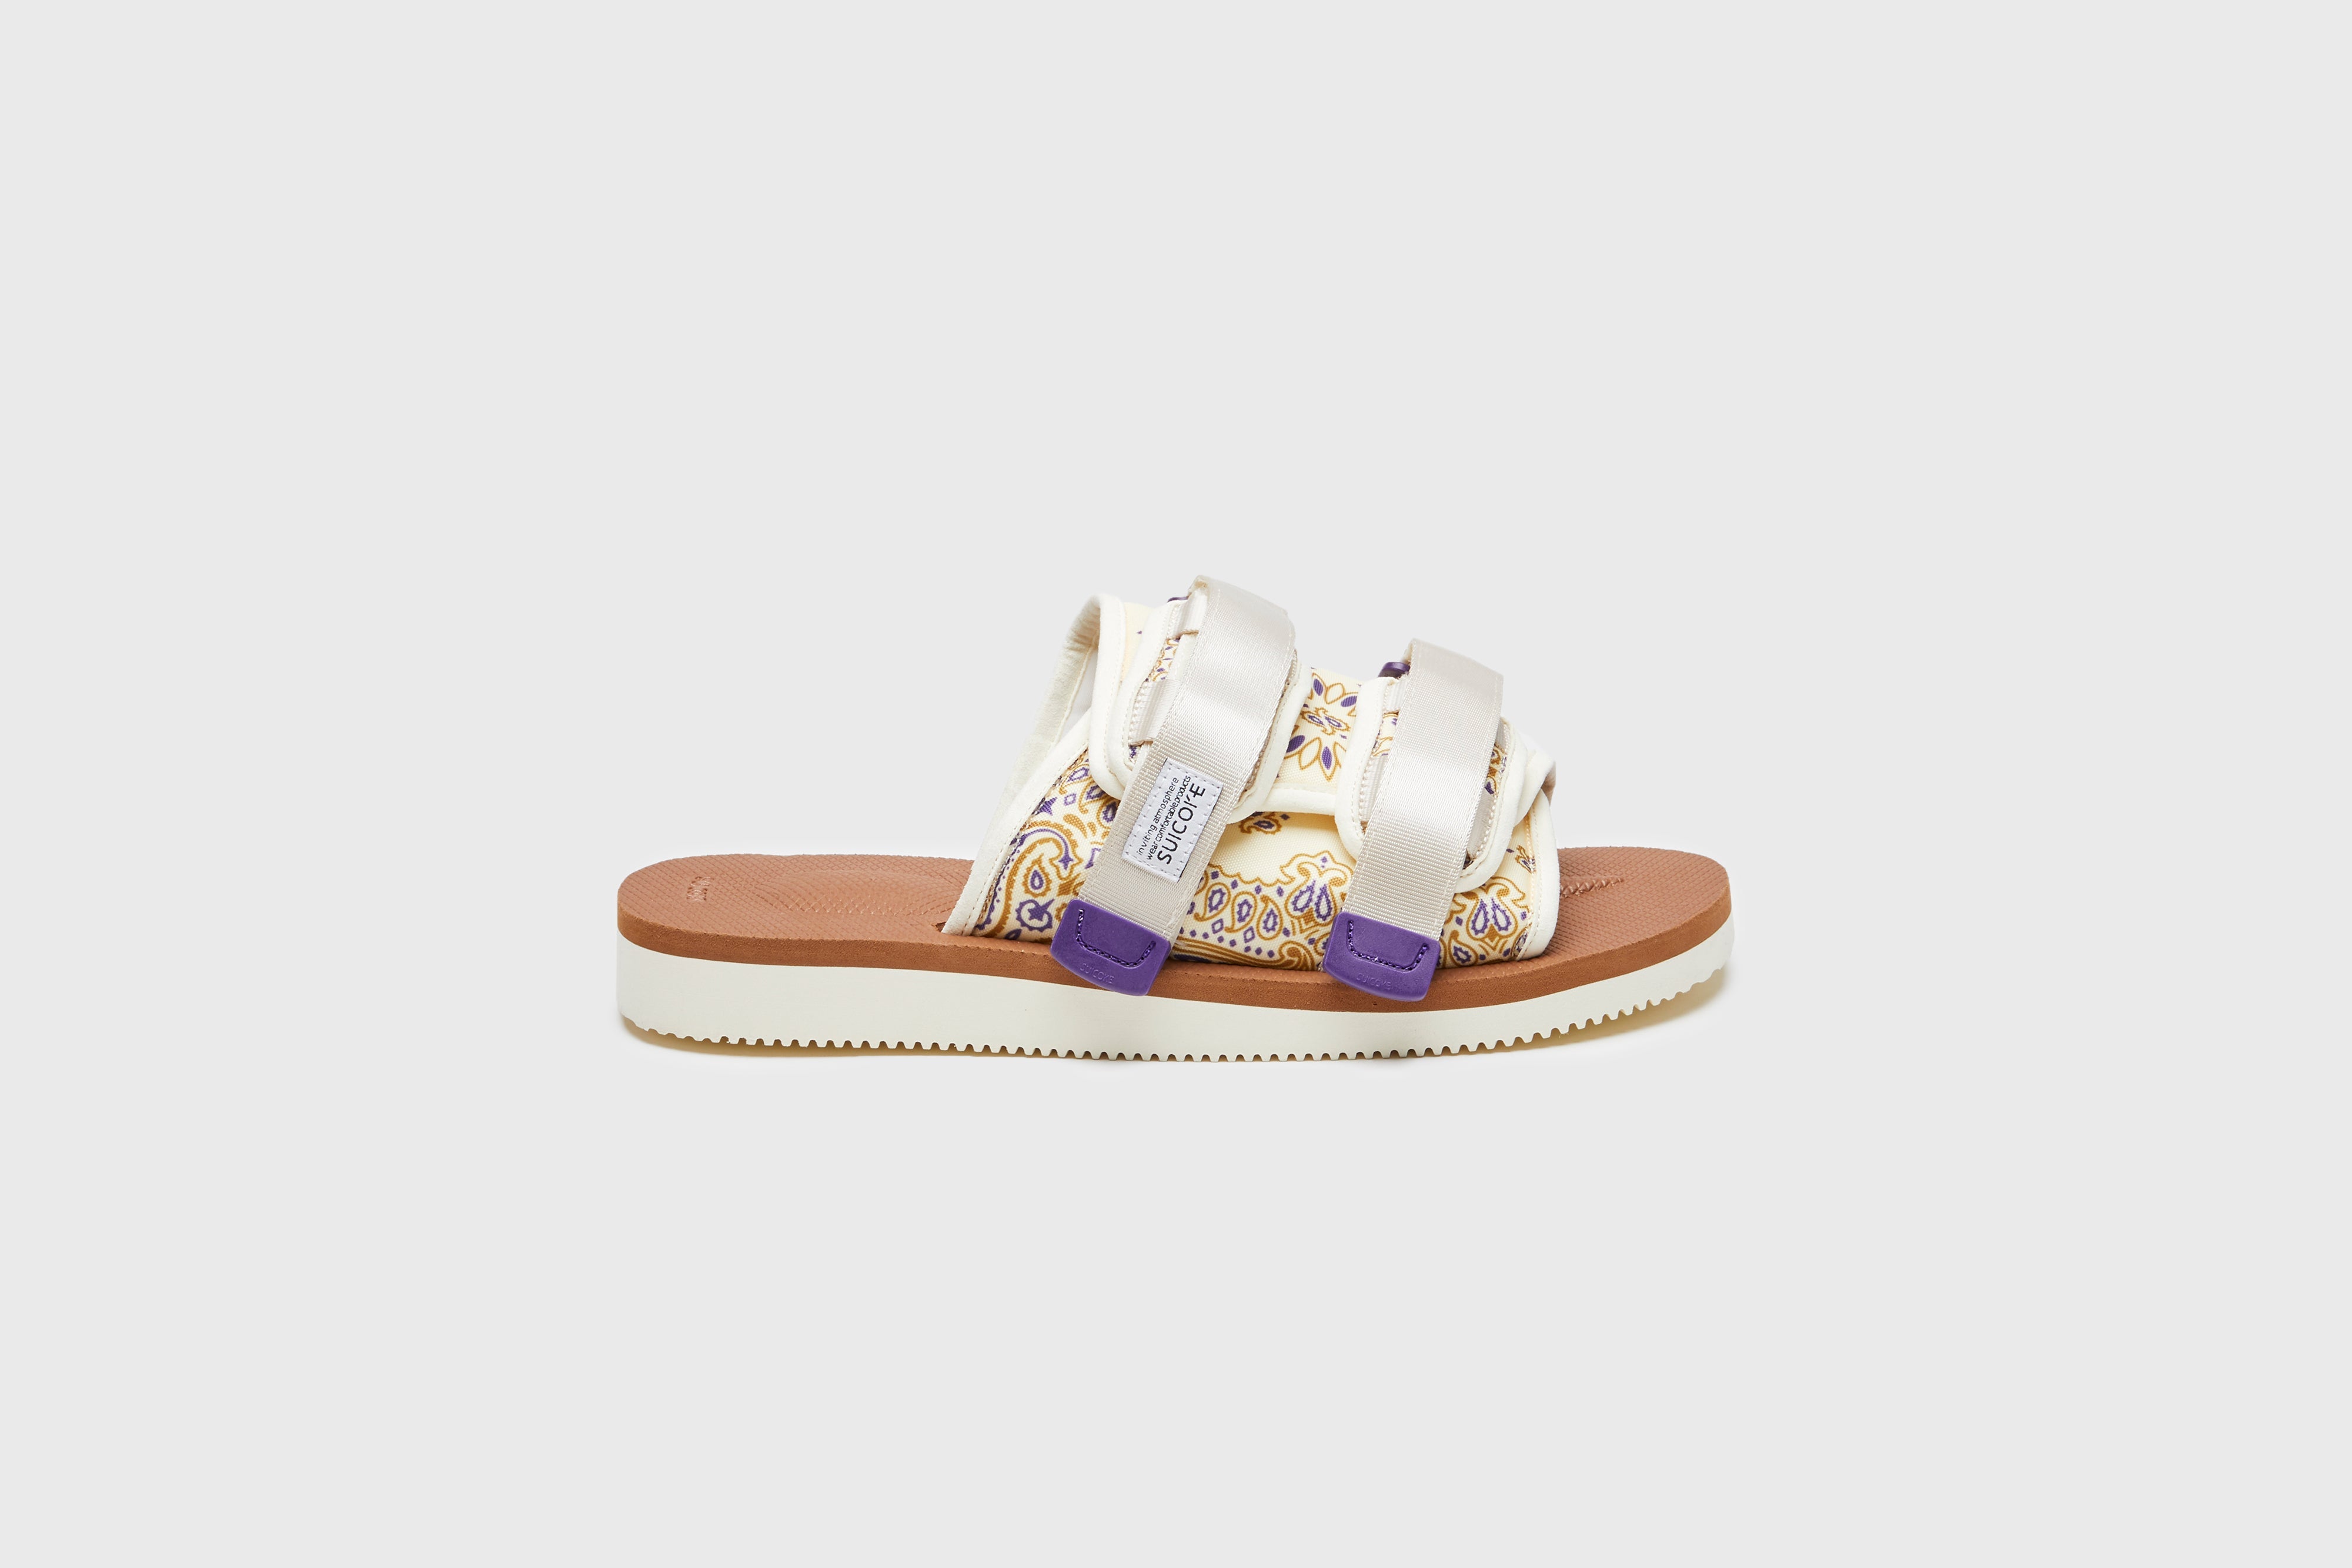 SUICOKE MOTO-Cab-PT05 sandals with ivory & brown nylon upper, ivory & brown midsole and sole, strap and logo patch. From Spring/Summer 2023 collection on eightywingold Web Store, an official partner of SUICOKE. OG-056CAB-PT05 IVORY X BROWN